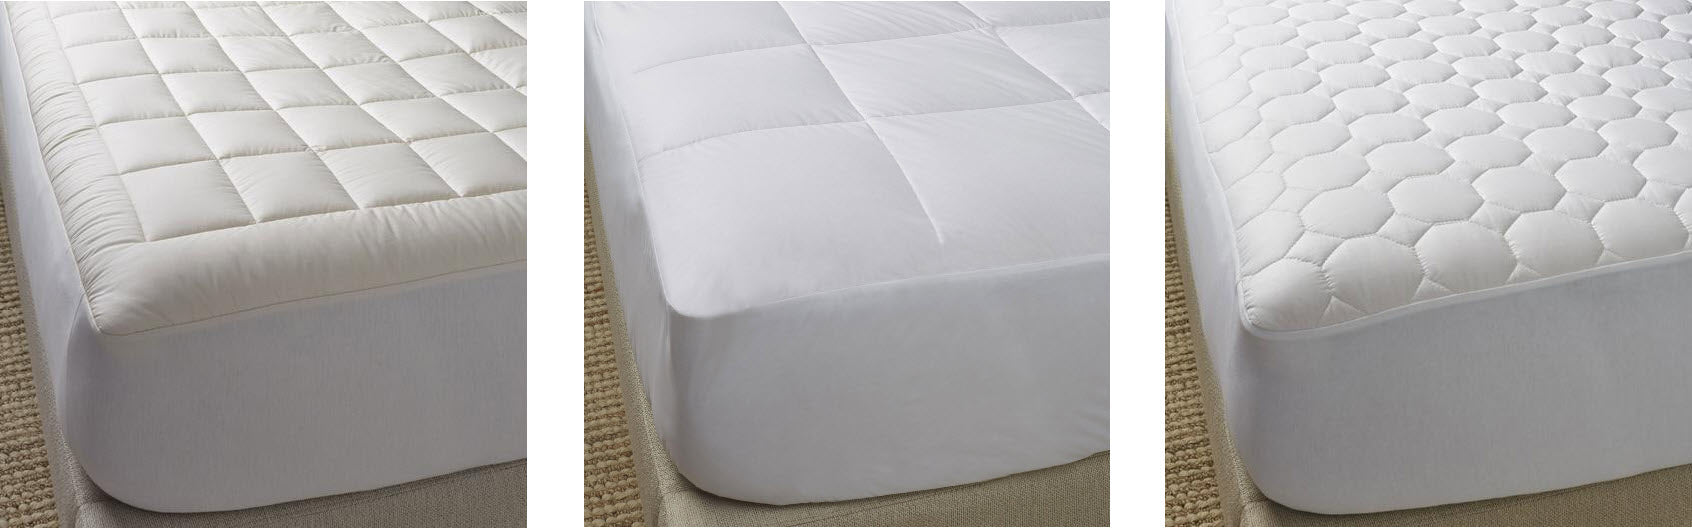 Scandia Home Mattress Pad adds luxurious layer to any bed